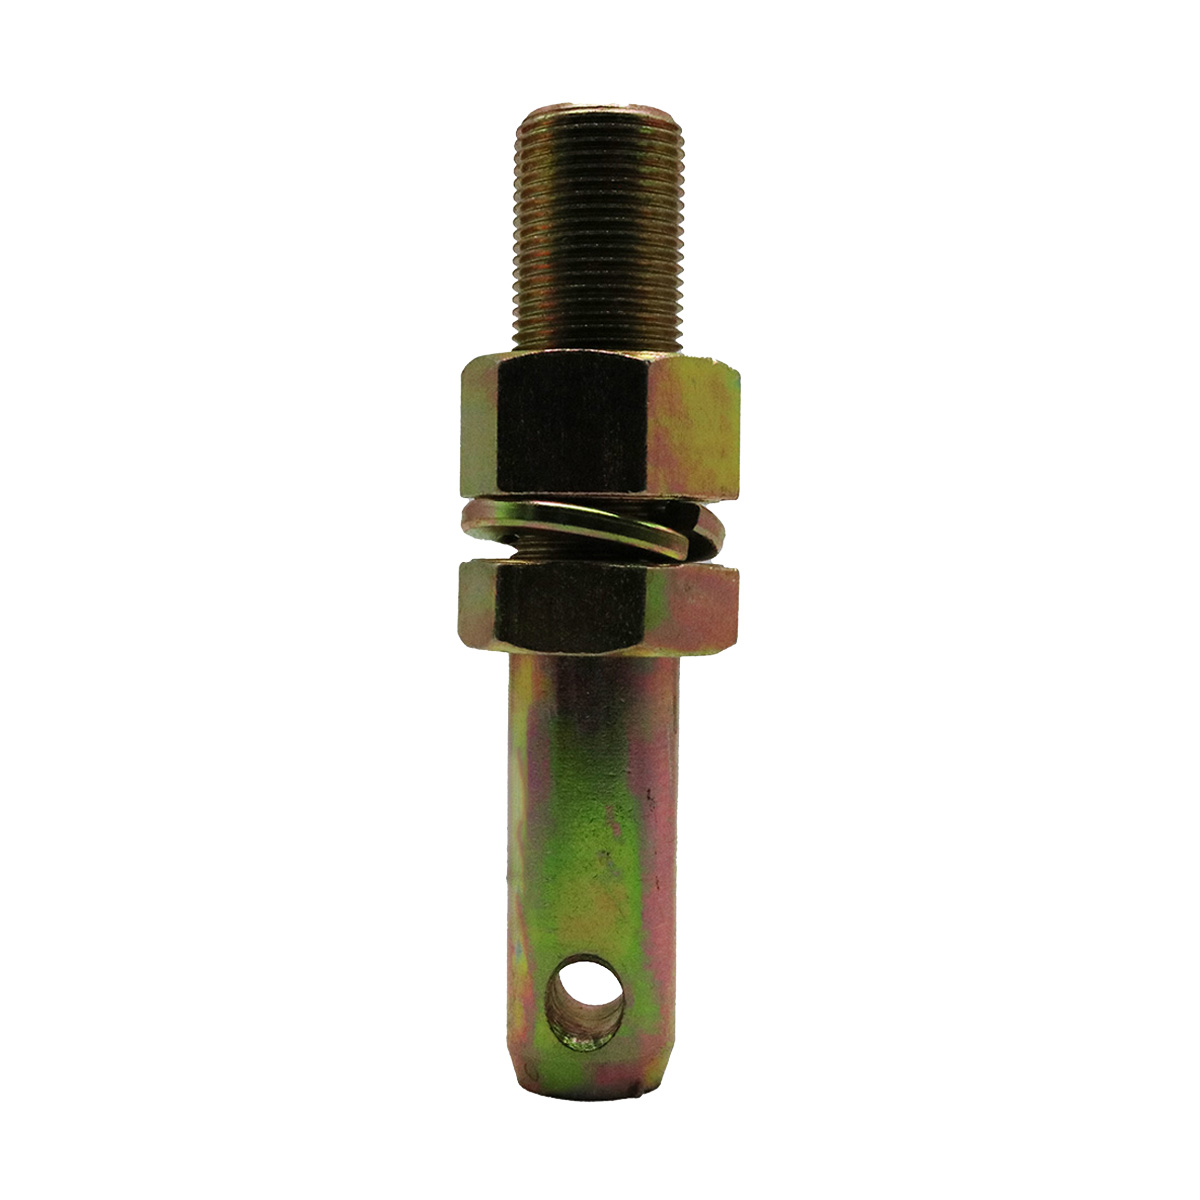 Adjustable Category 2 Forged Lift Arm Pin